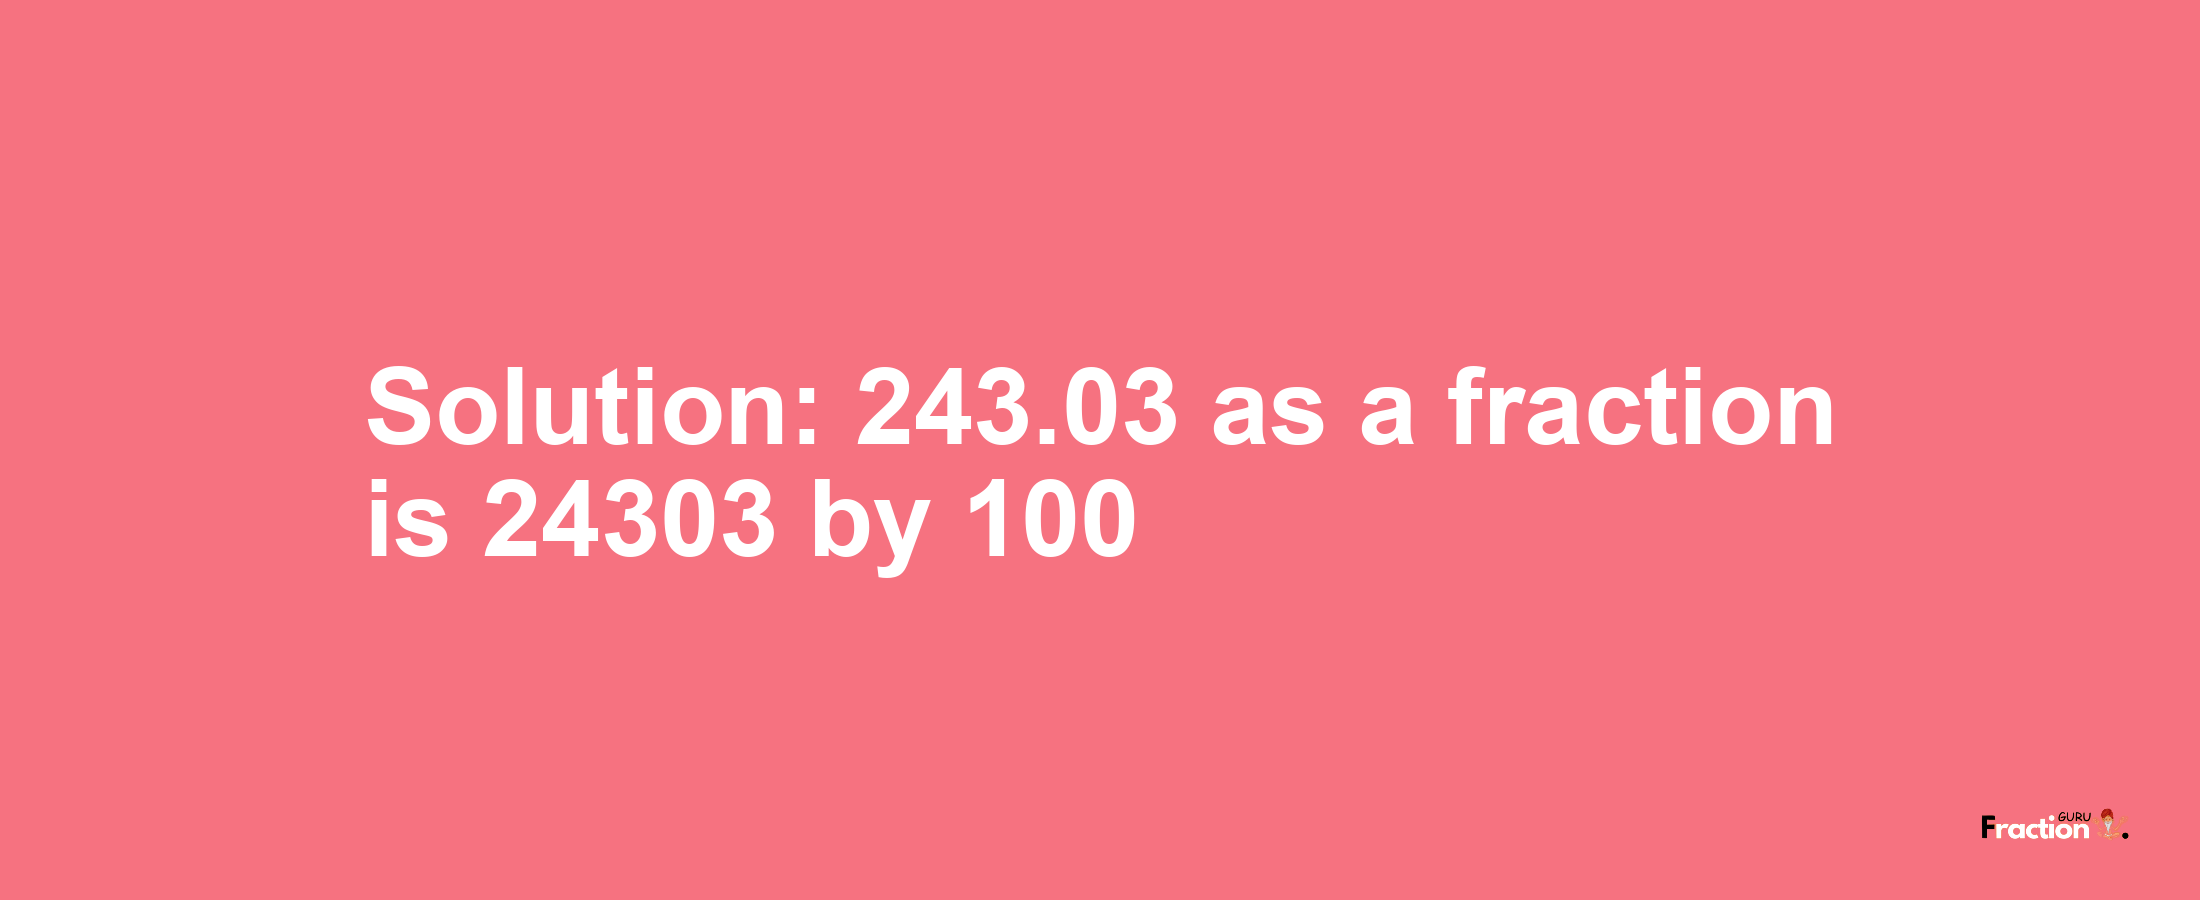 Solution:243.03 as a fraction is 24303/100